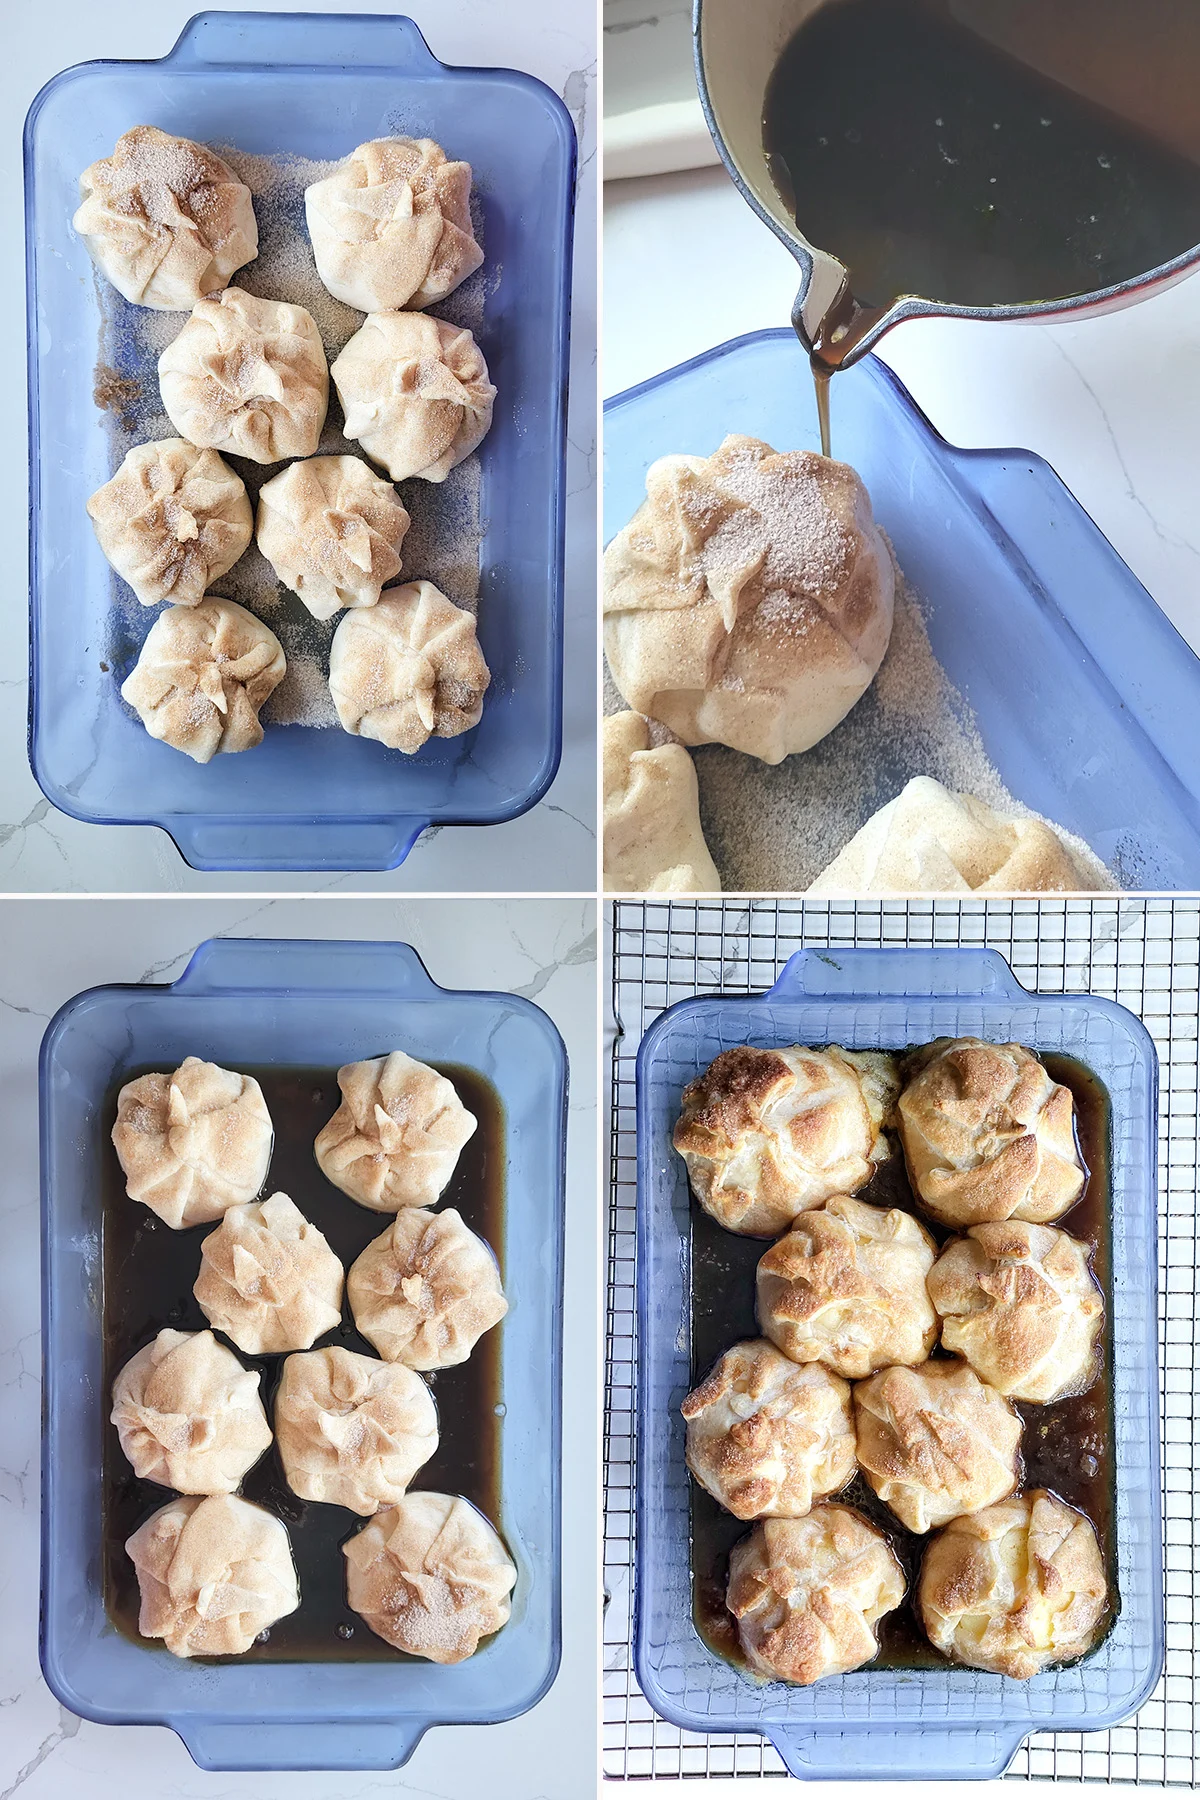 dough wrapped apples in a blue baking pan. Syrup pouring around the apples. Apples before and after baking.